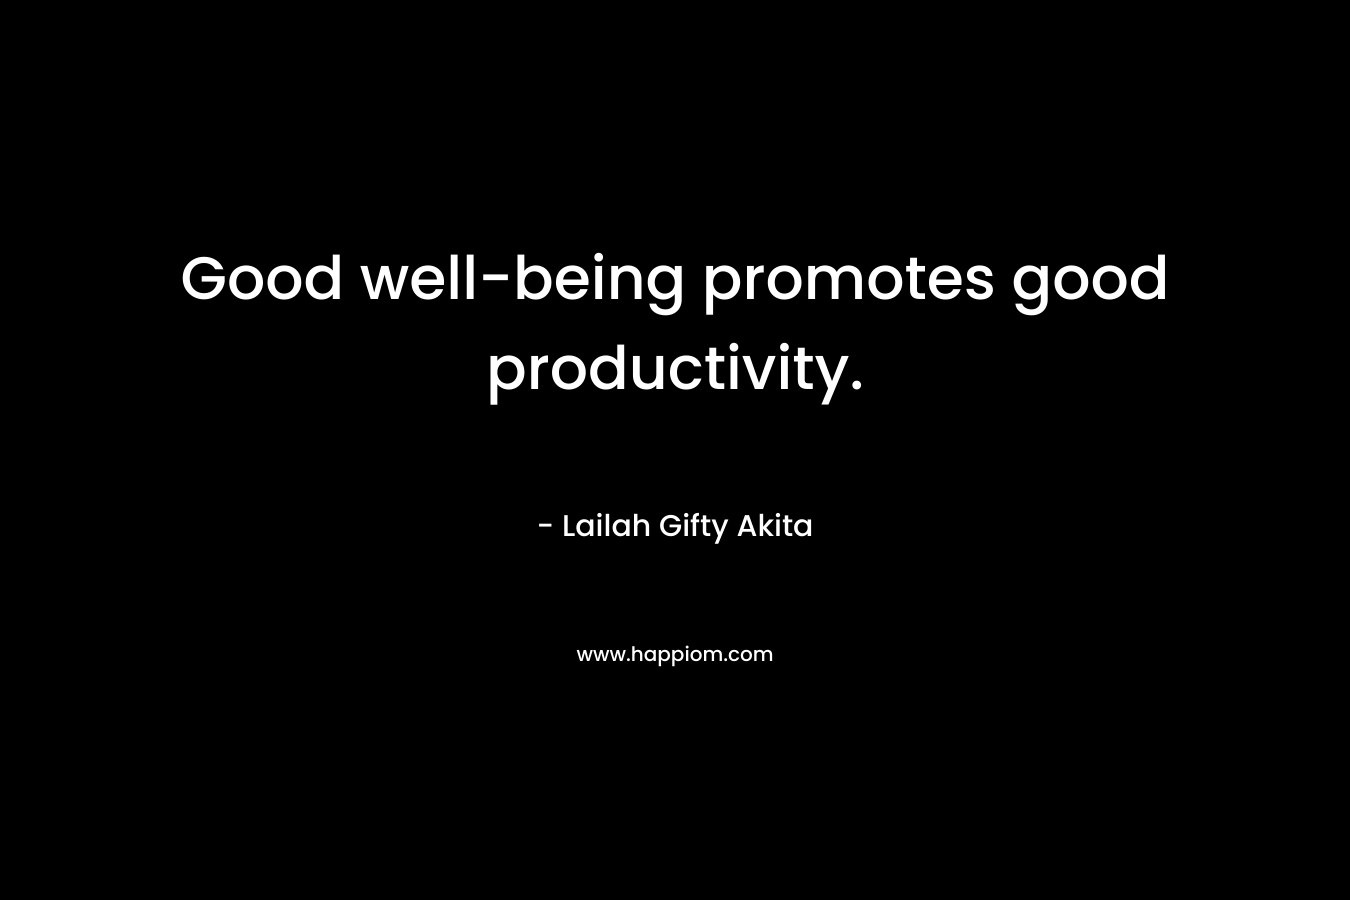 Good well-being promotes good productivity.